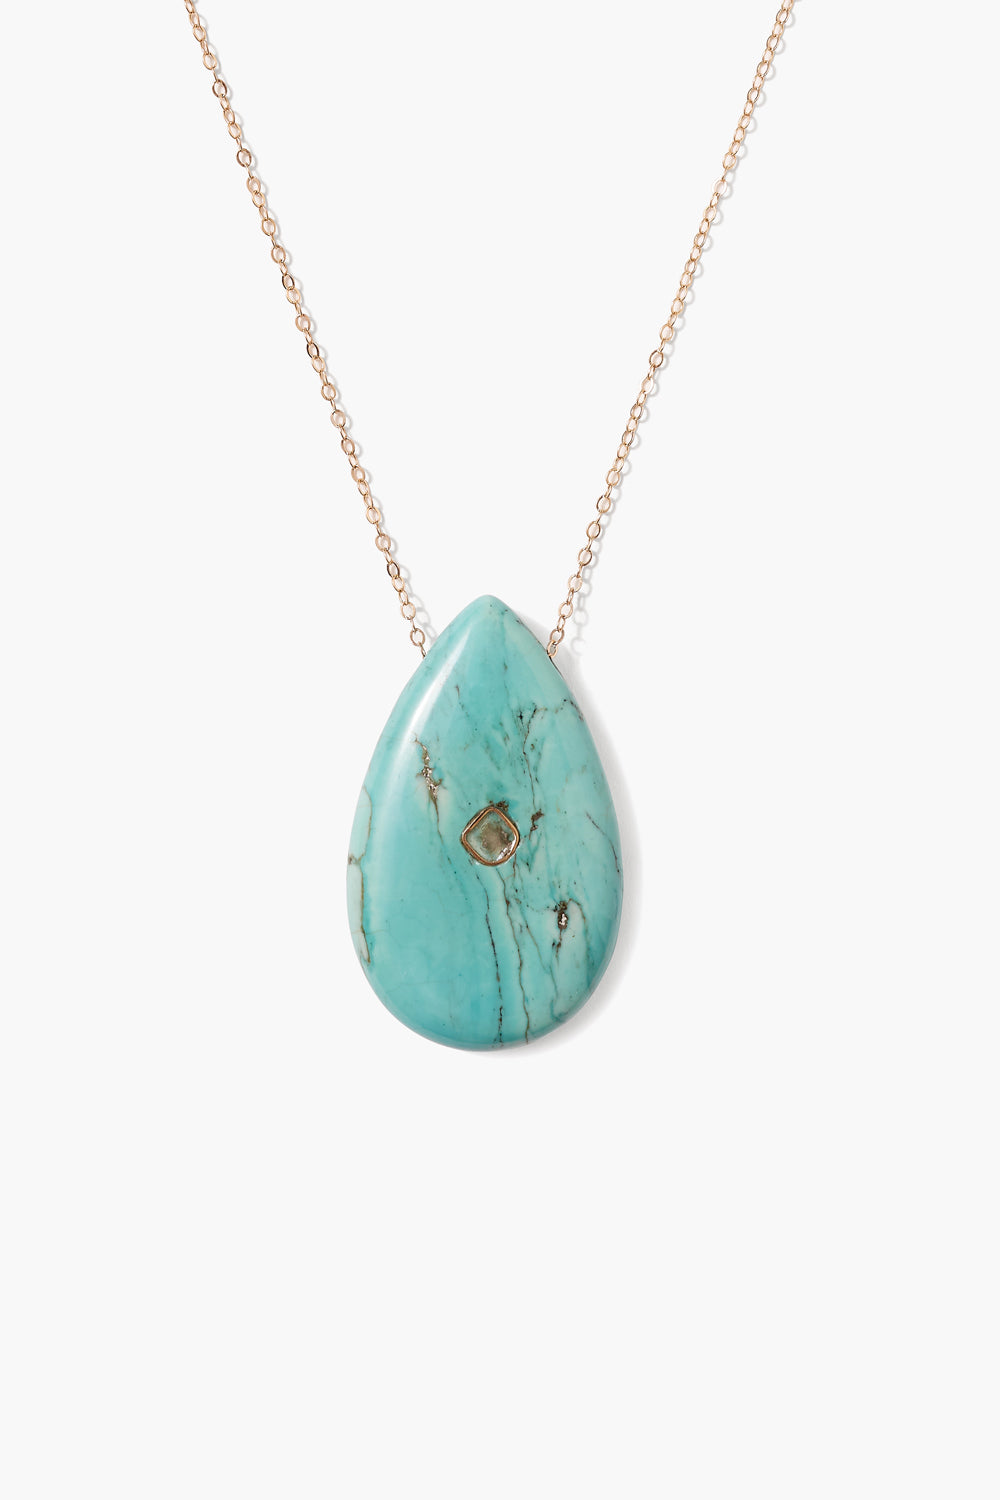 Chan Luu | 14k Gold Temple Necklace | Turquoise